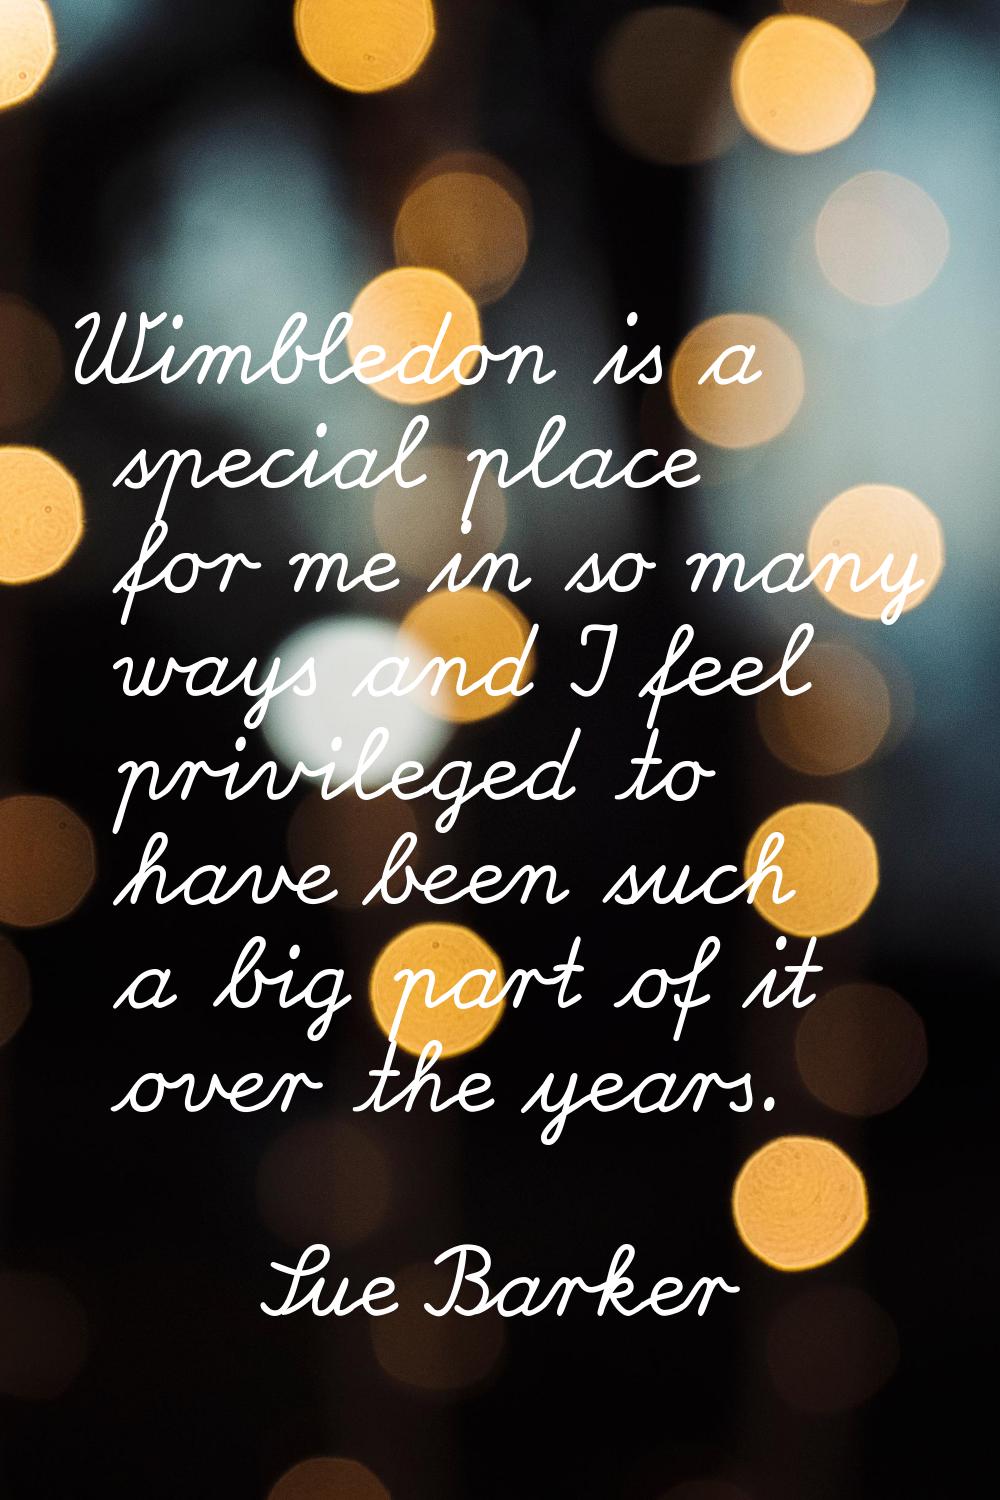 Wimbledon is a special place for me in so many ways and I feel privileged to have been such a big p